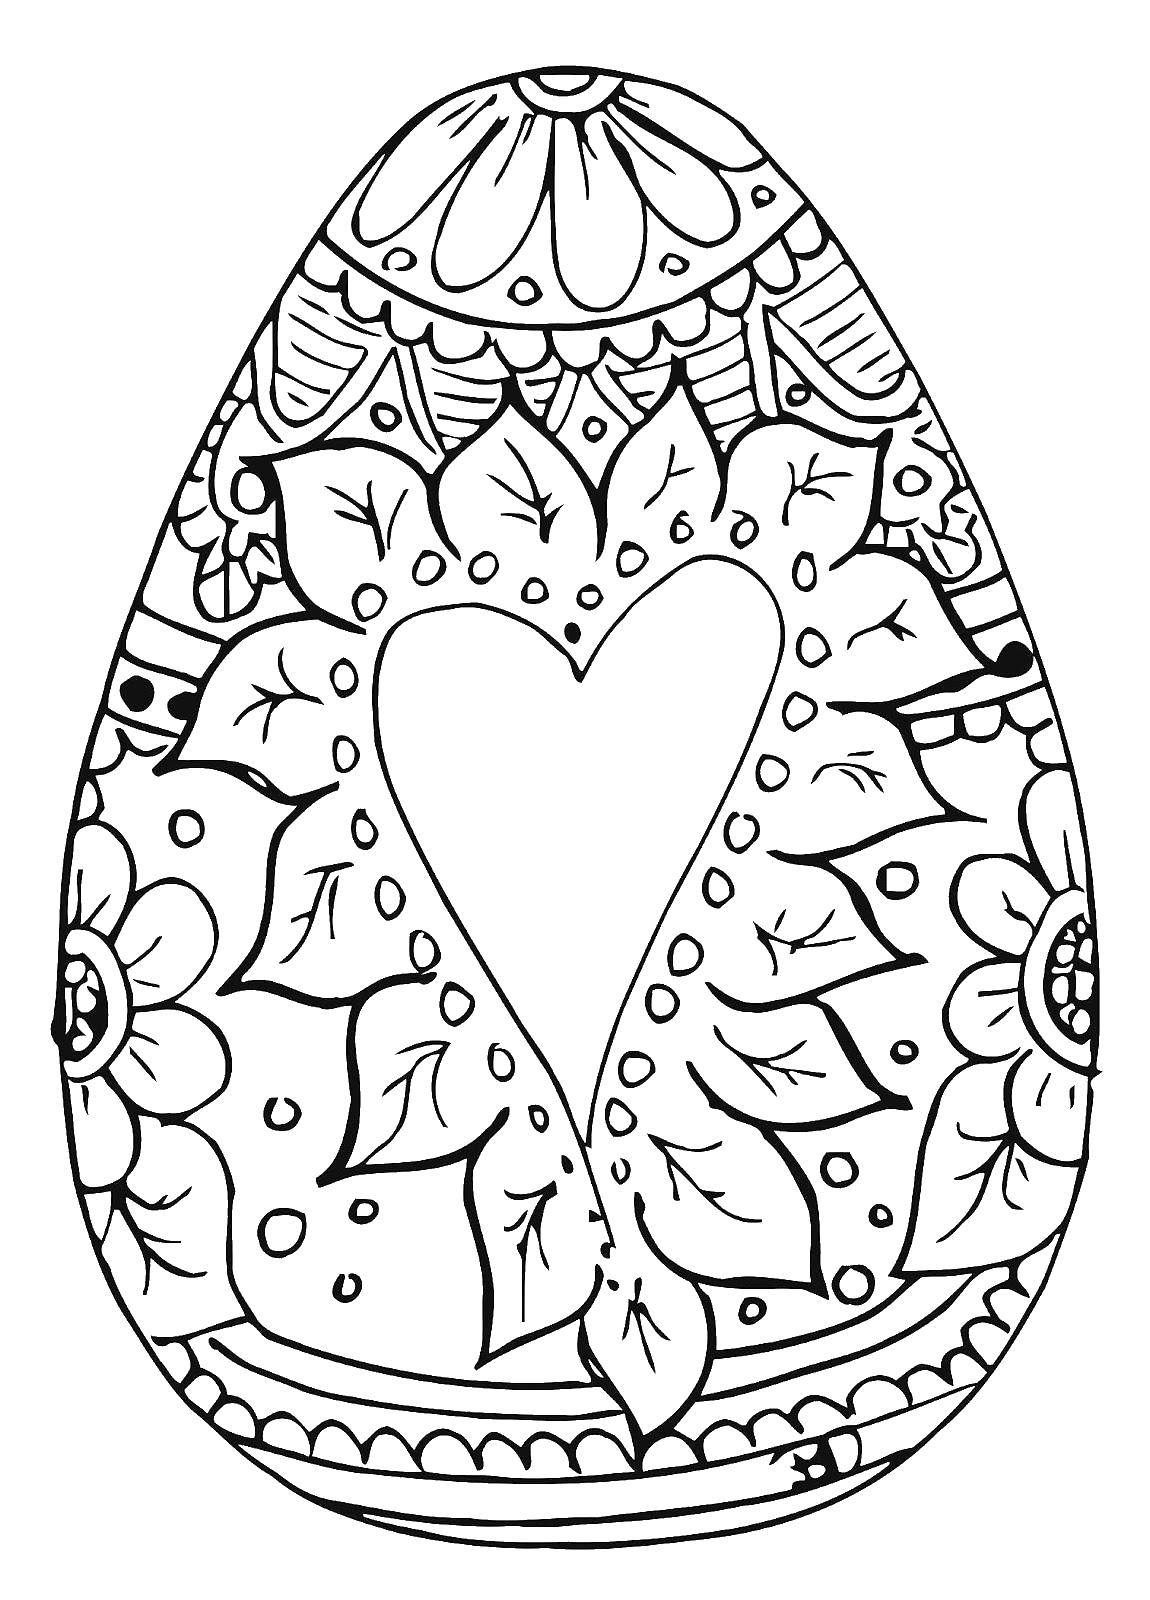 Coloring Decorated Easter eggs. Category Easter eggs. Tags:  Easter eggs, basket, Easter.